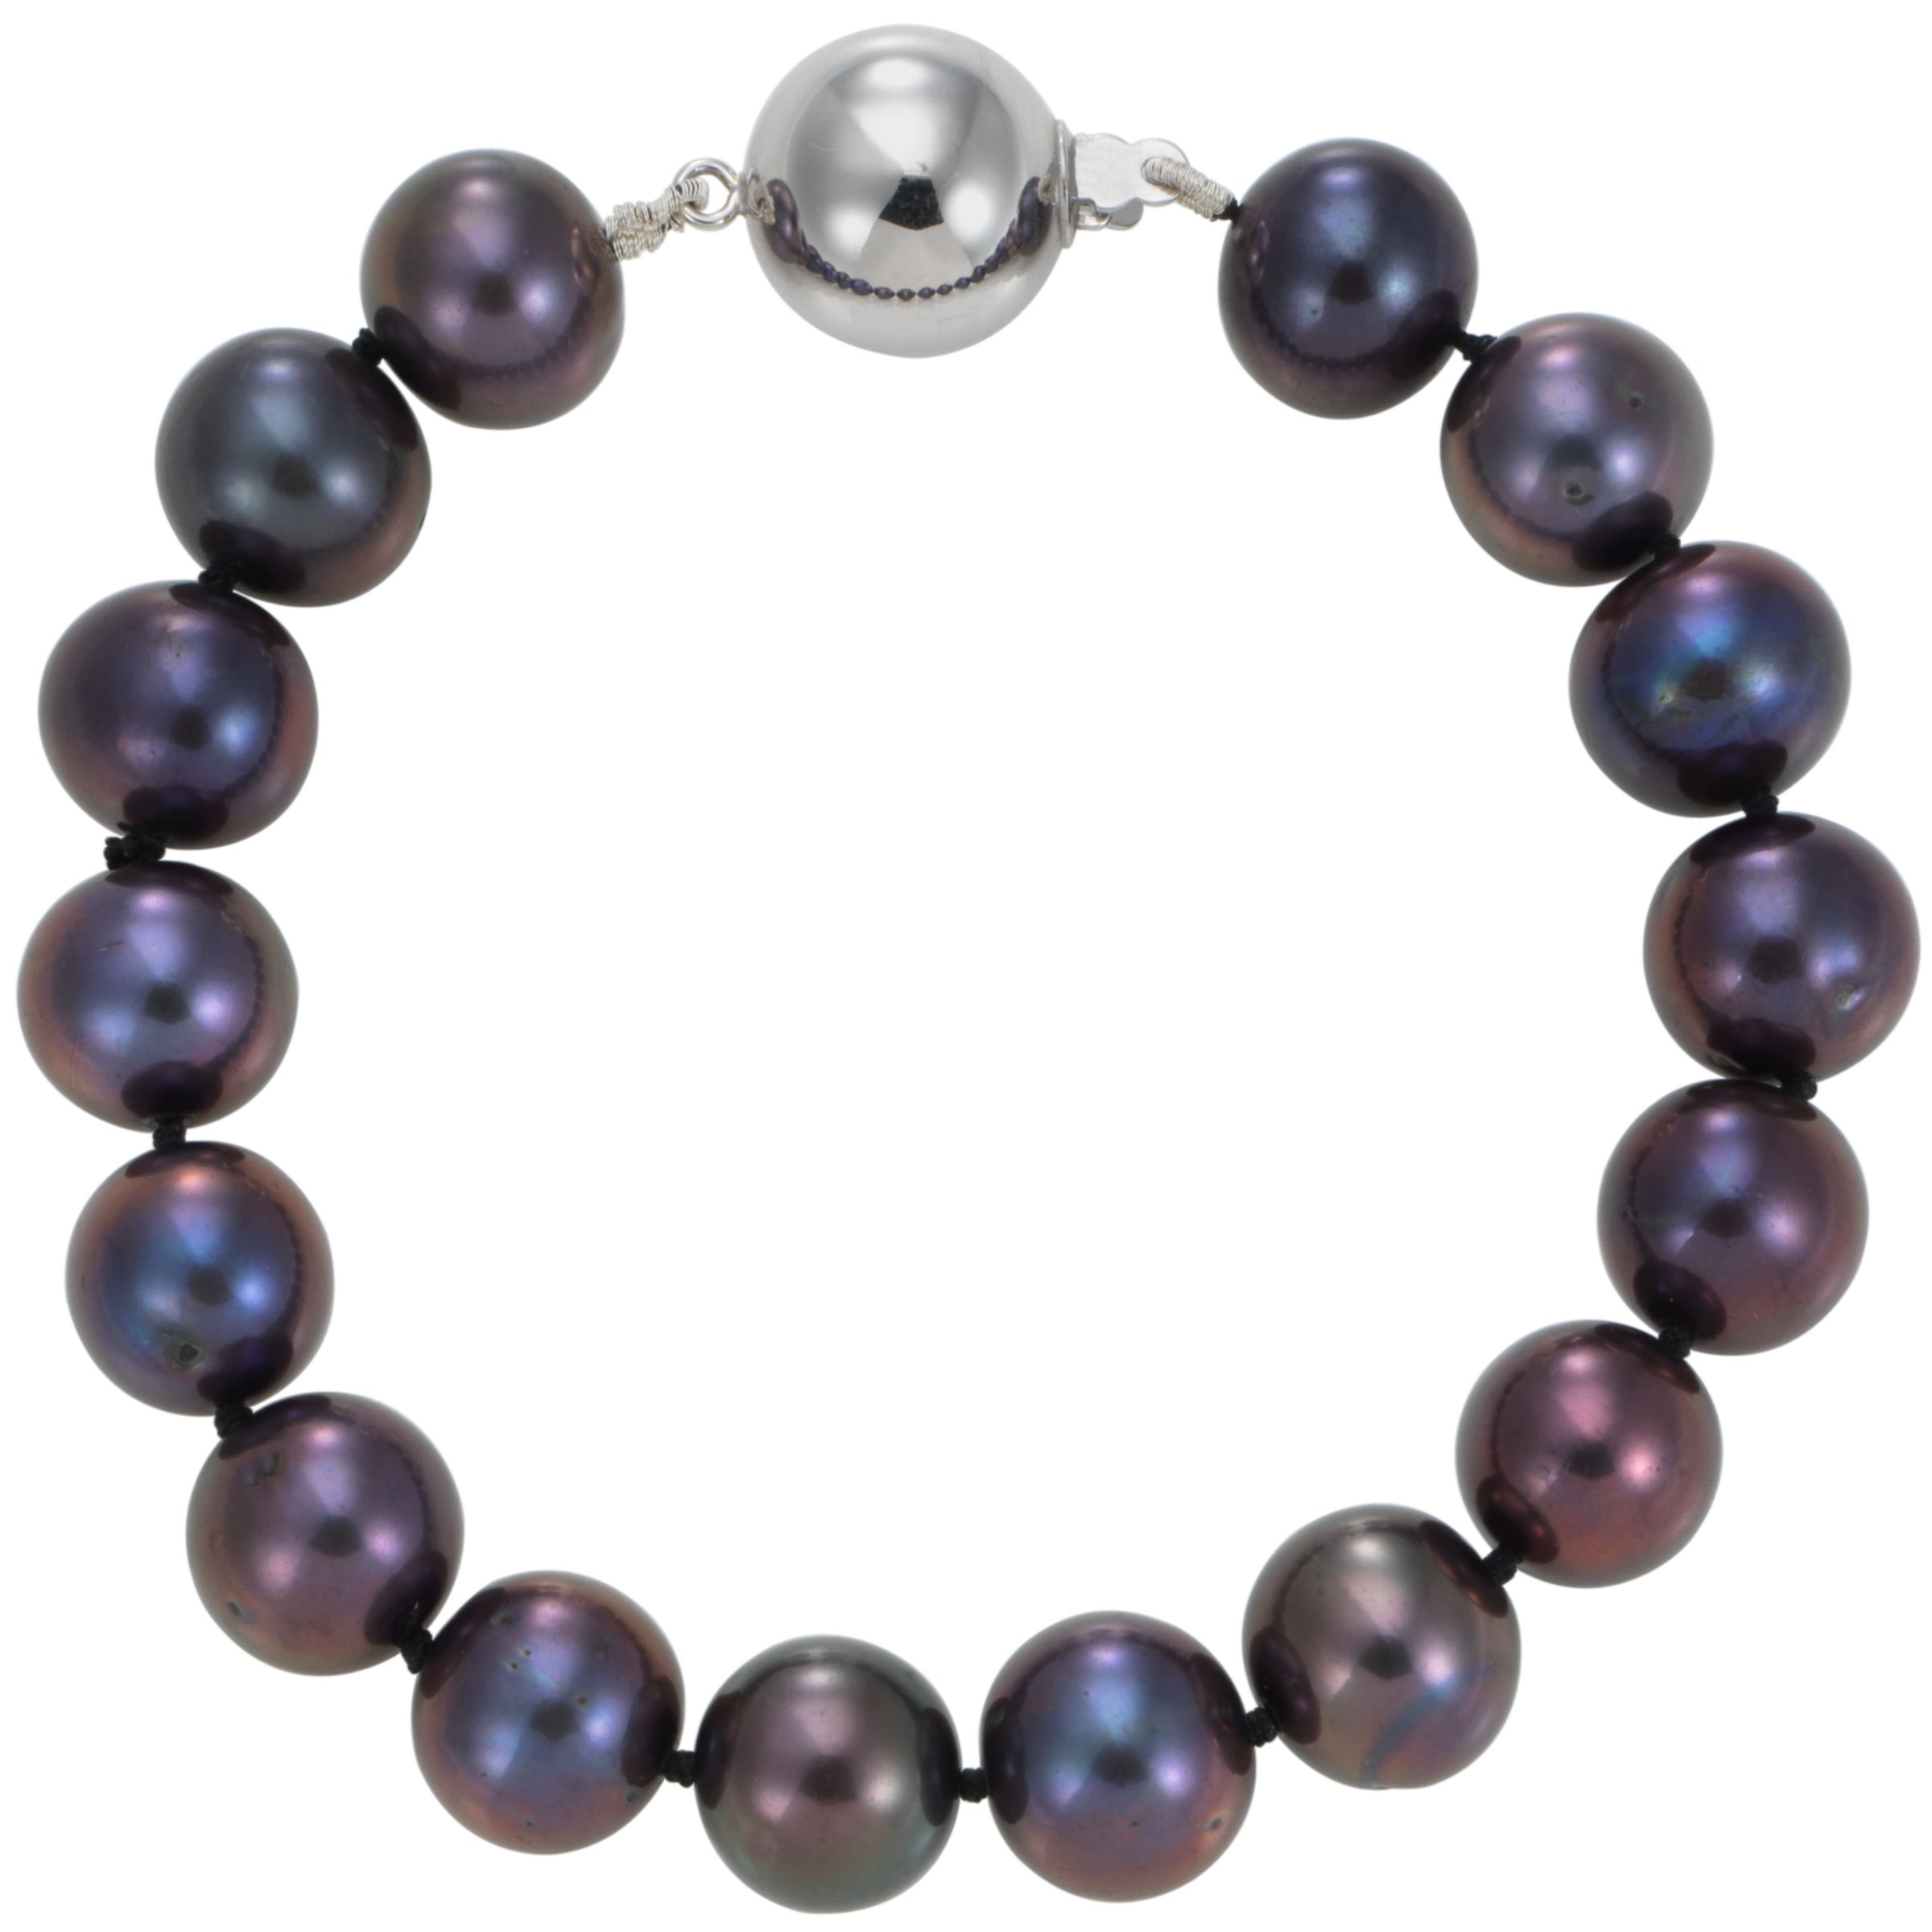 7" Cultured Pearl Blueberry Knotted Bracelet, One size at John Lewis